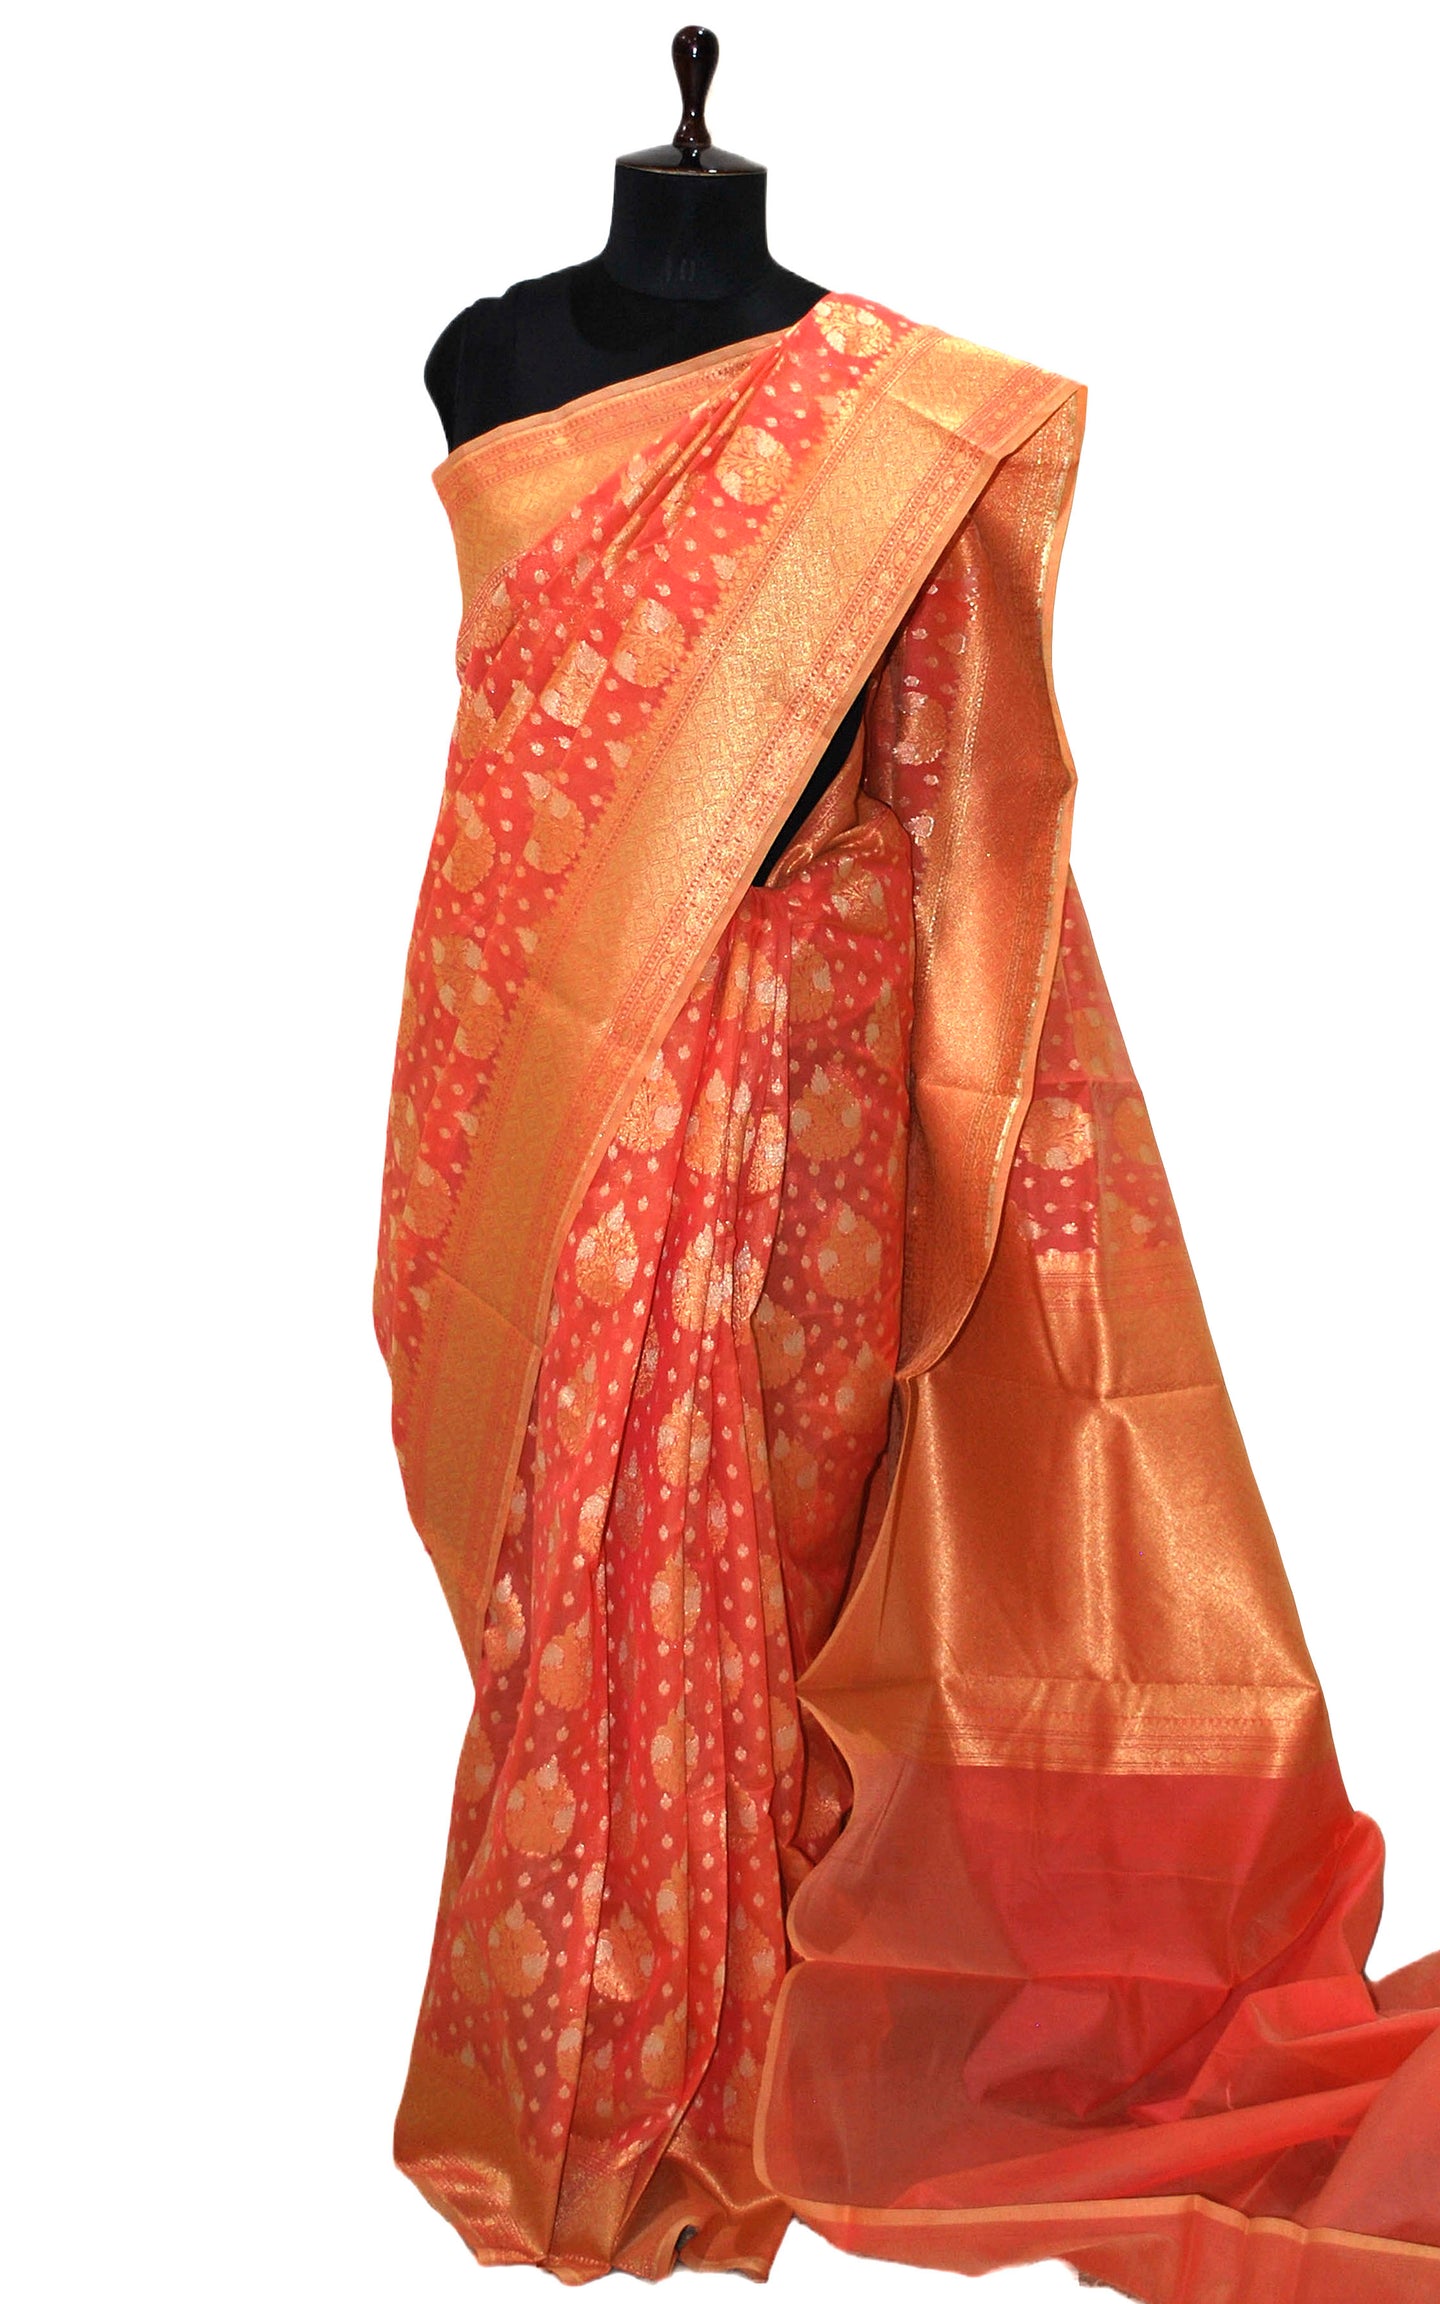 Handwoven Cotton Chanderi Saree in Sunset Orange and Muted Gold